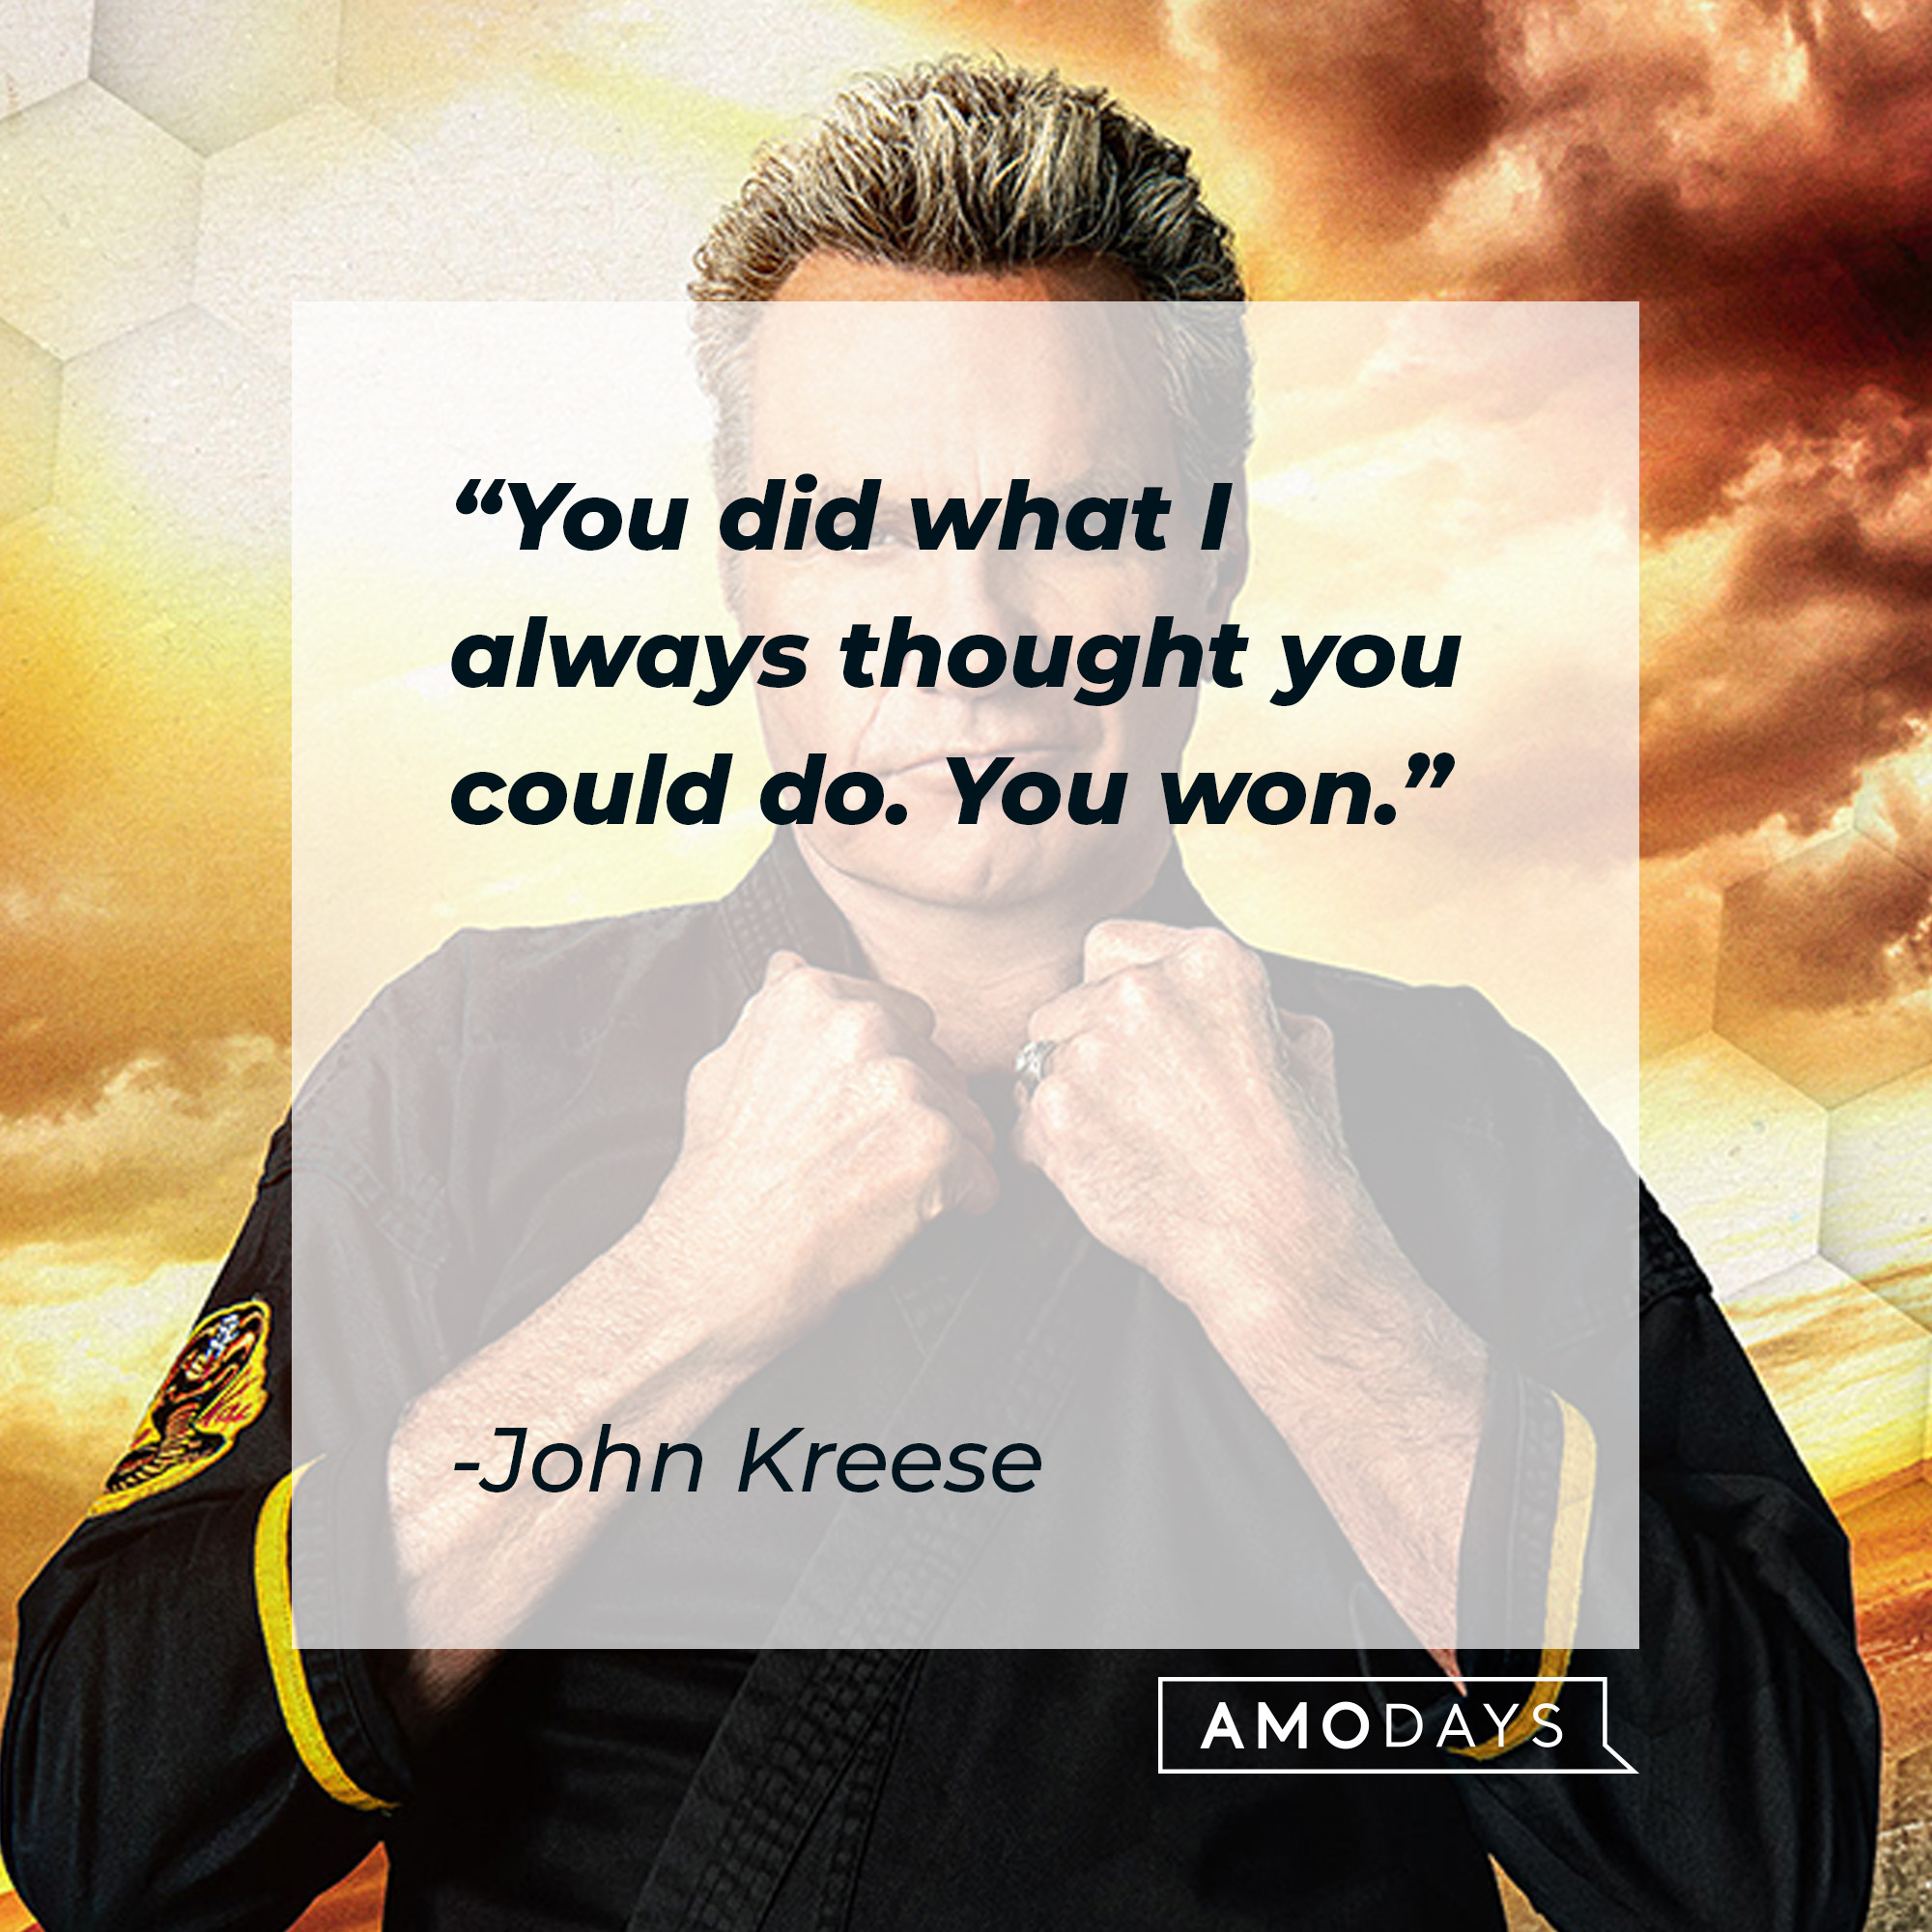 John Kreese, with his quote:"You did what I always thought you could do. You won." │Source: facebook.com/CobraKaiSeries